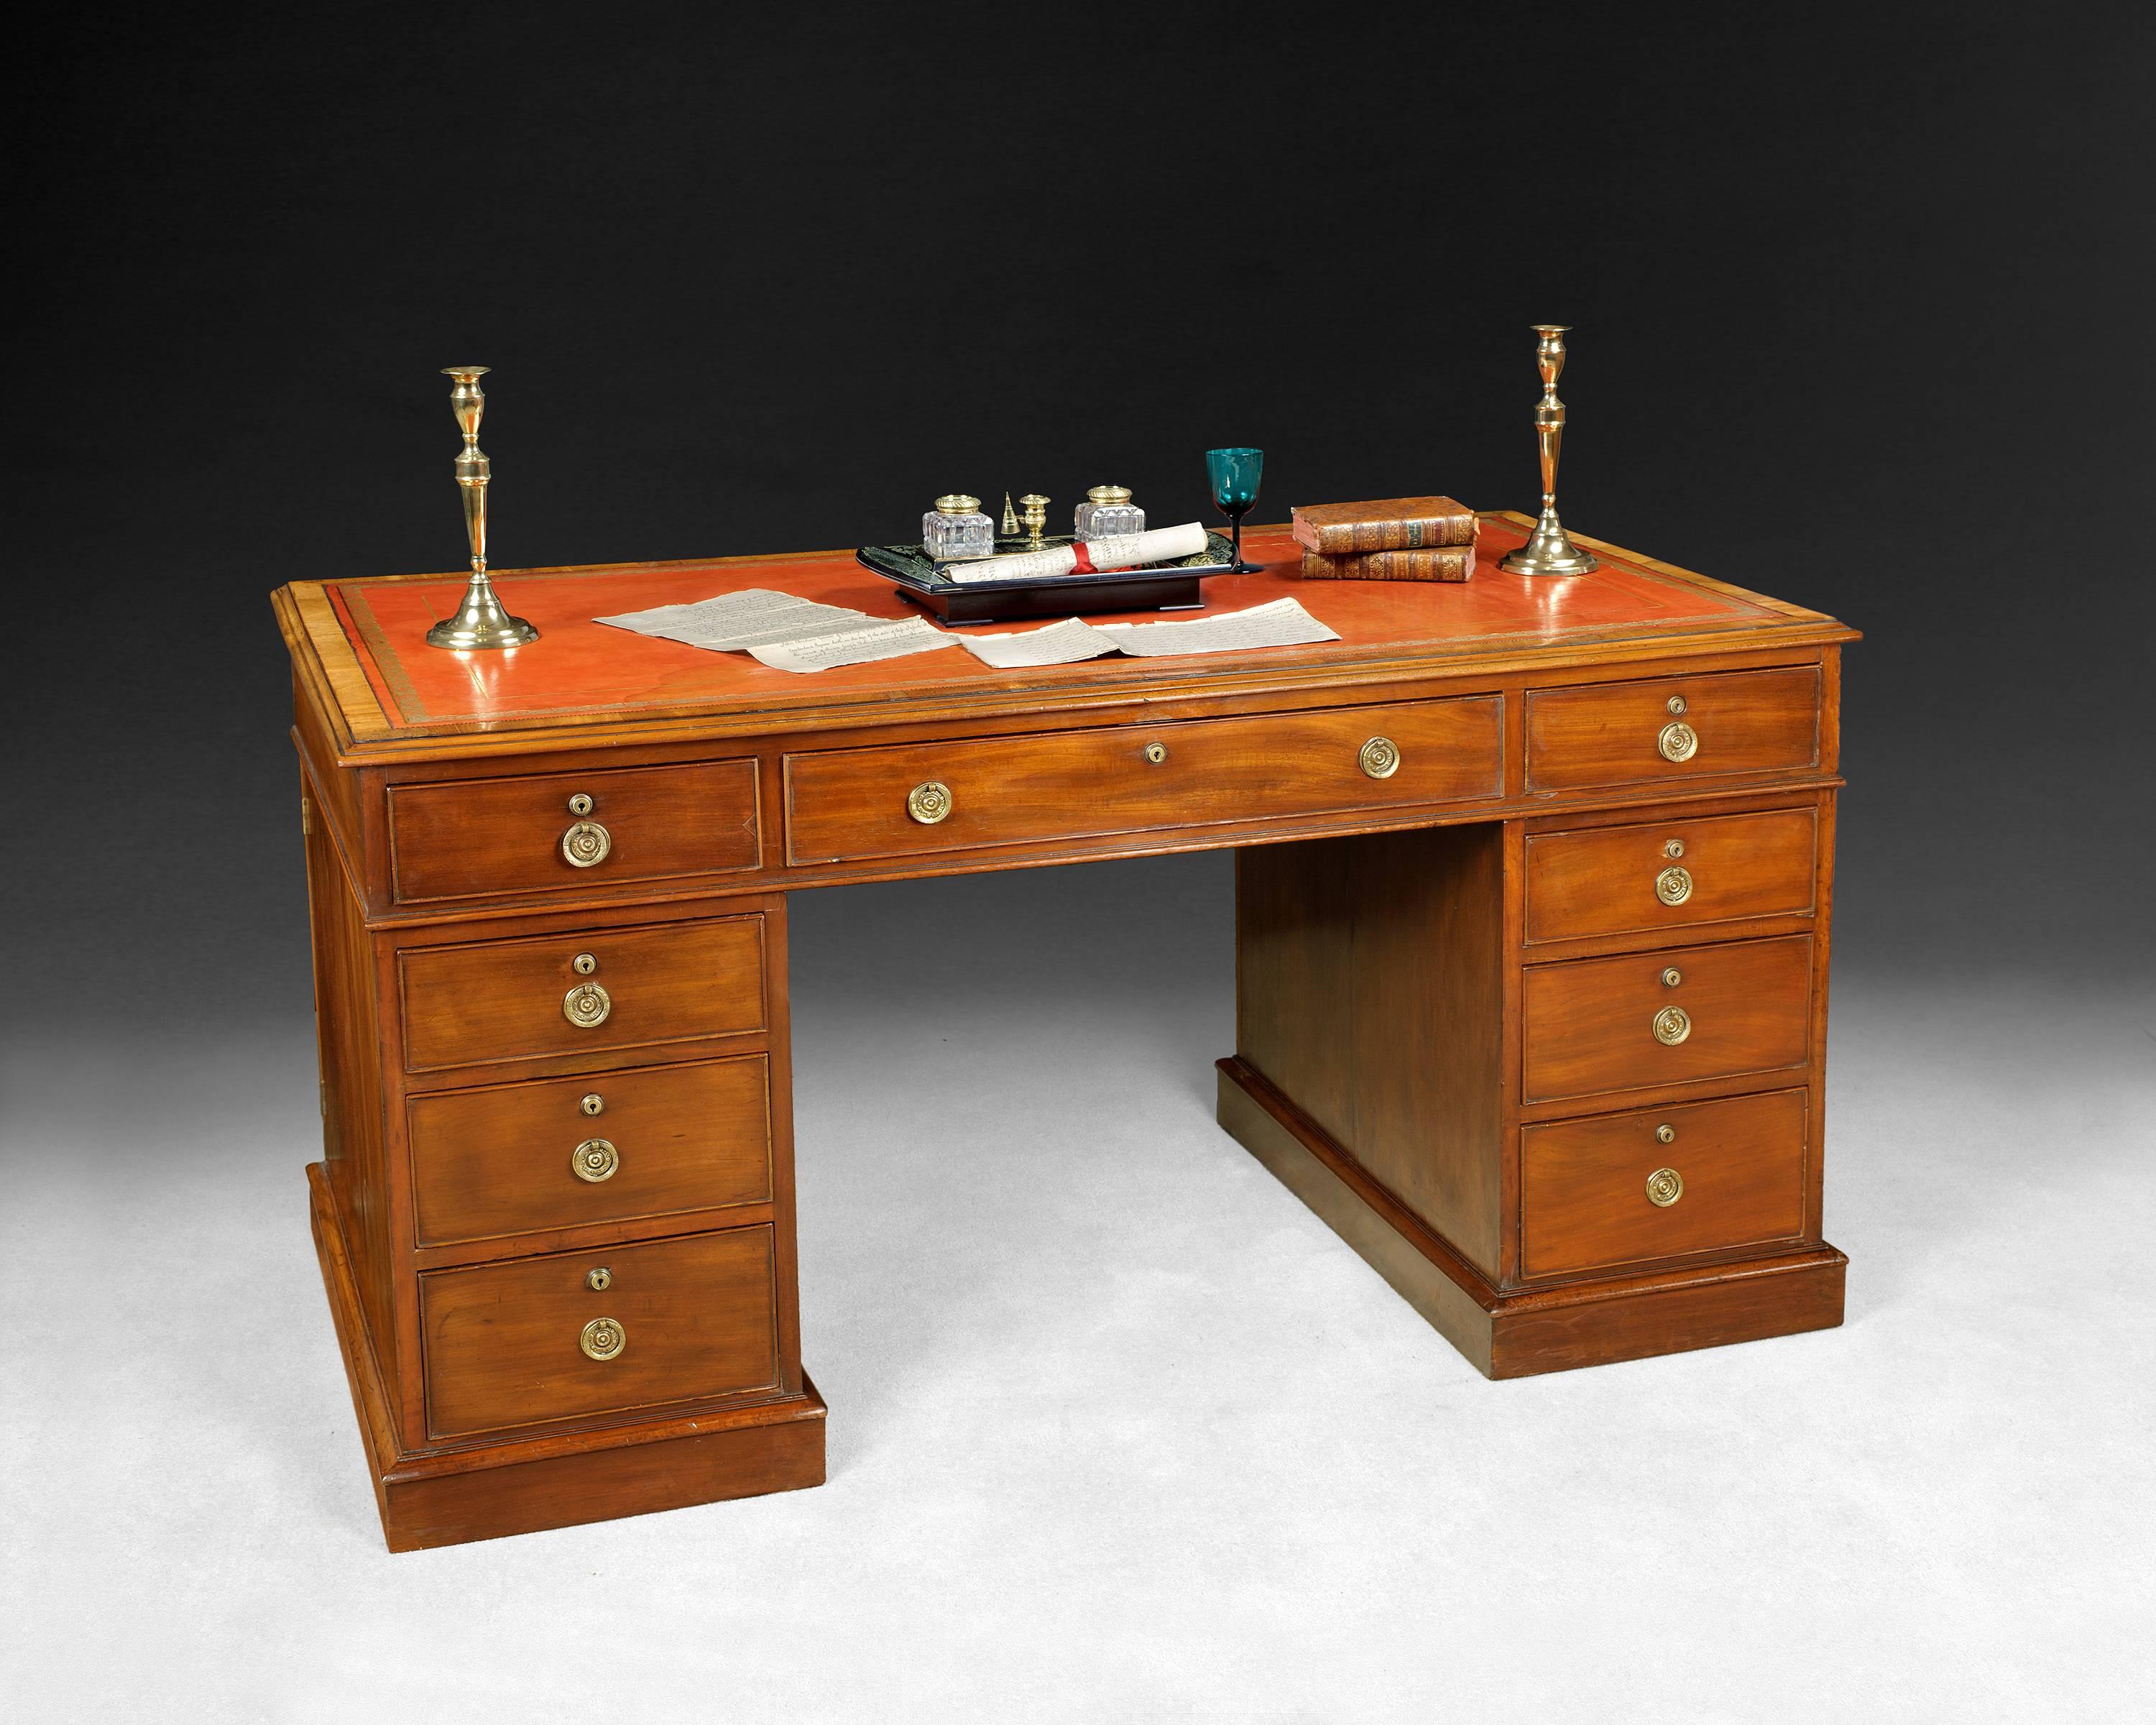 A good William IV period mahogany partners pedestal desk, the top with a red gilt tooled and crossbanded leather panel and three frieze drawers to one side and three false drawers to the other, the pedestals both with three graduated drawers and